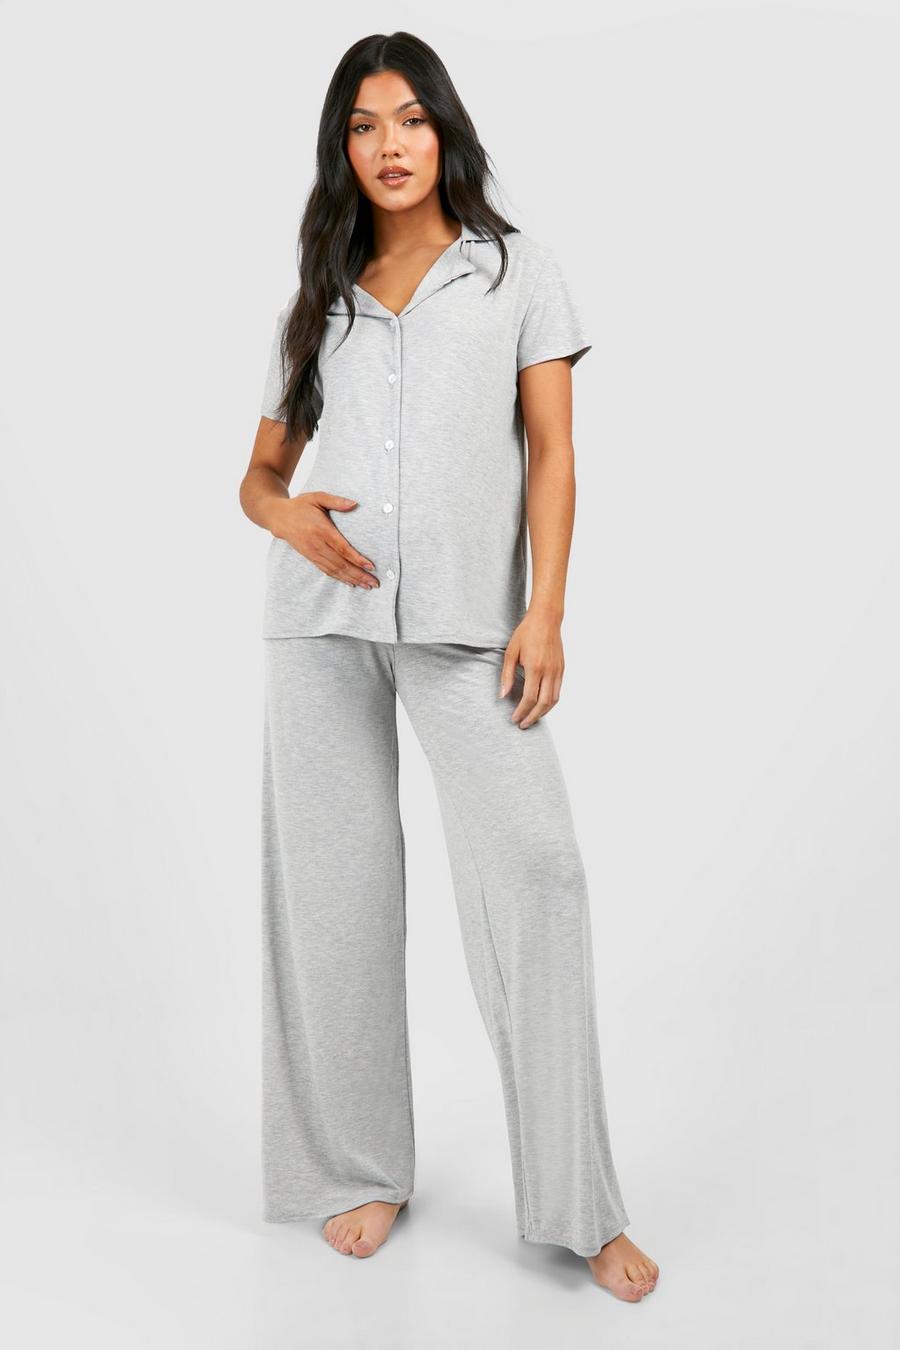 Grey Maternity Short Sleeve Peached Jersey Trouser Set